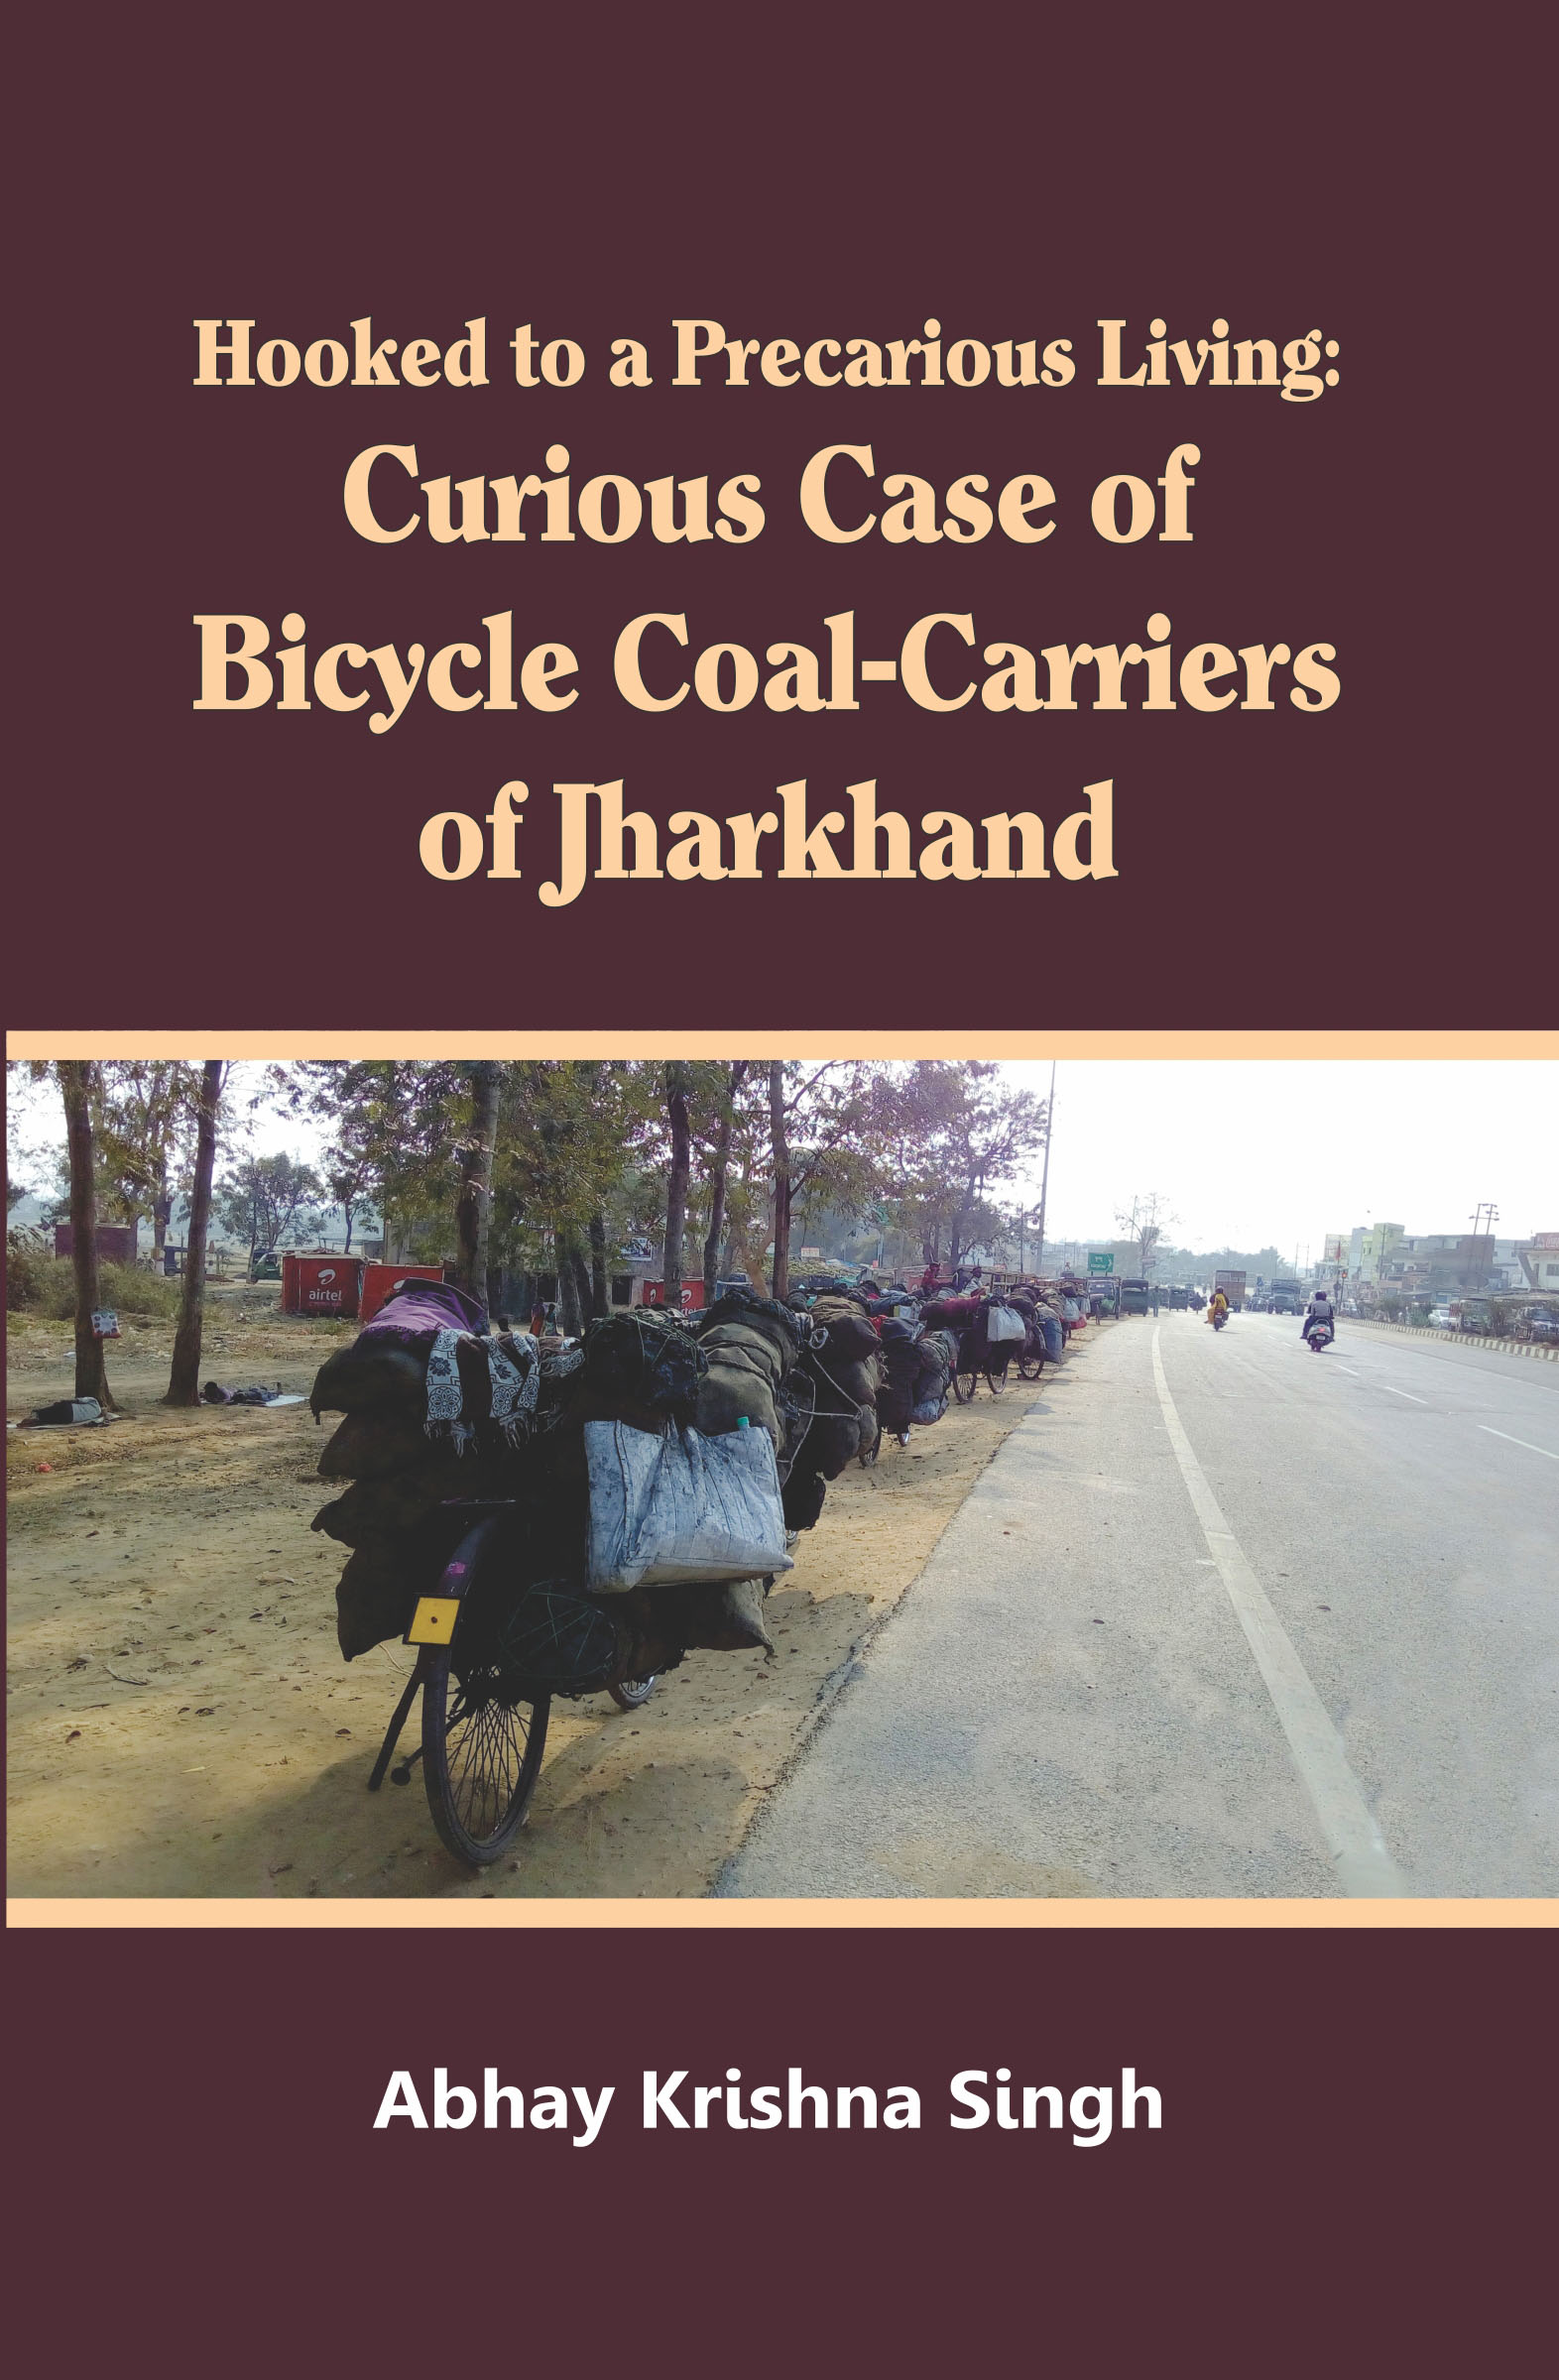 Hooked to a Precarious Living: Curious Case of Bicycle Coal Carriers of Jharkhand